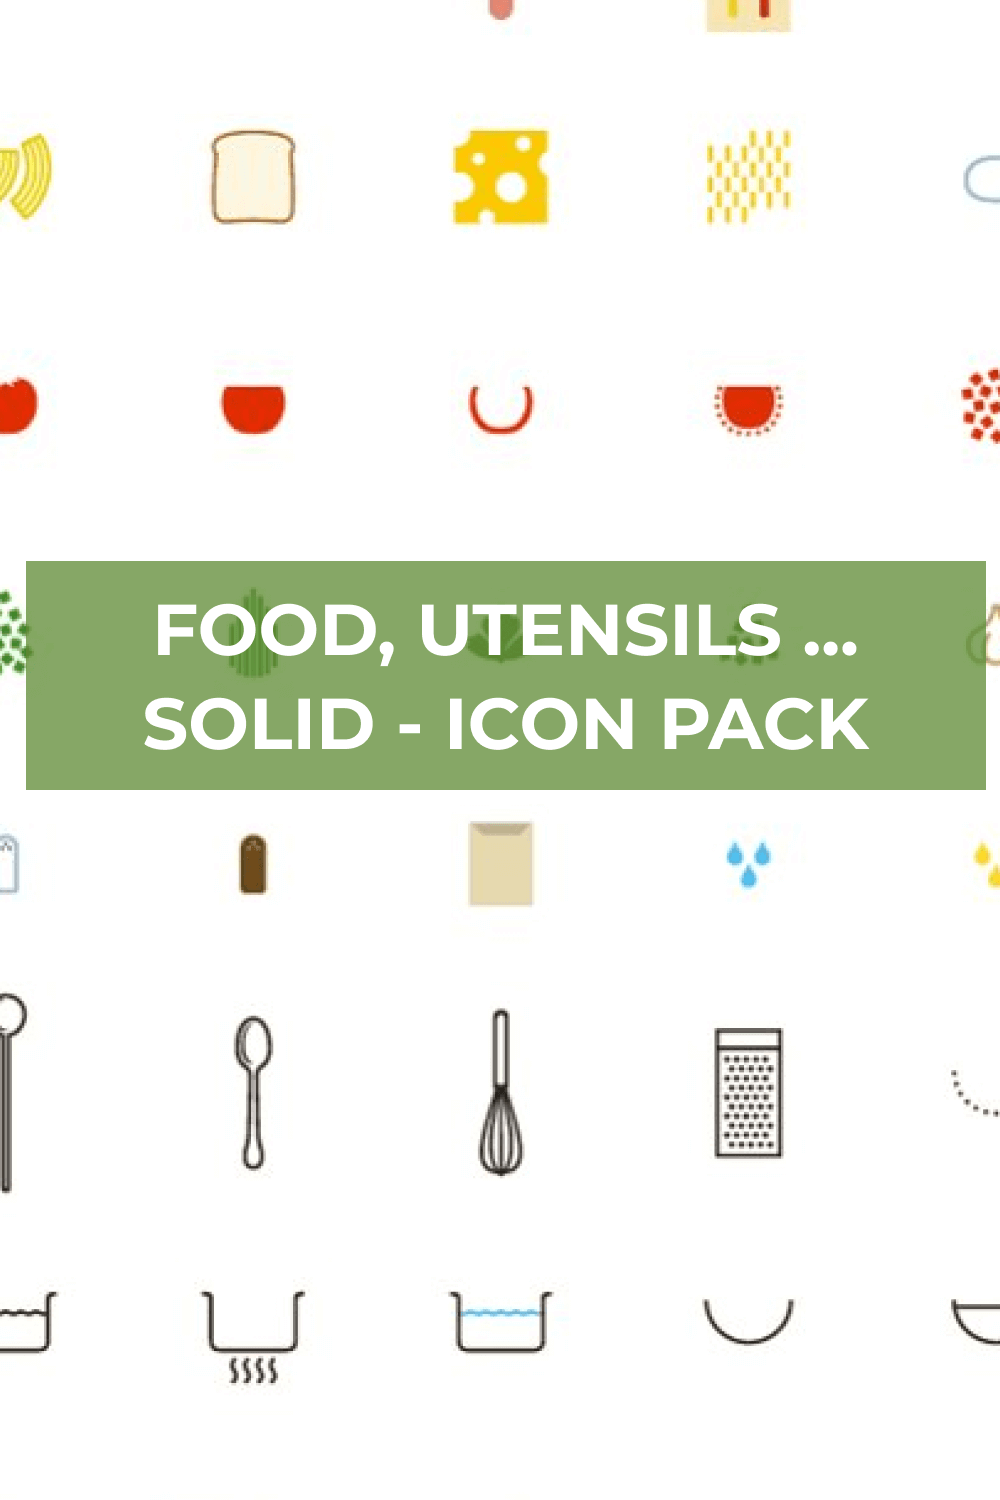 Vector shapes of the solid food utensils icons.